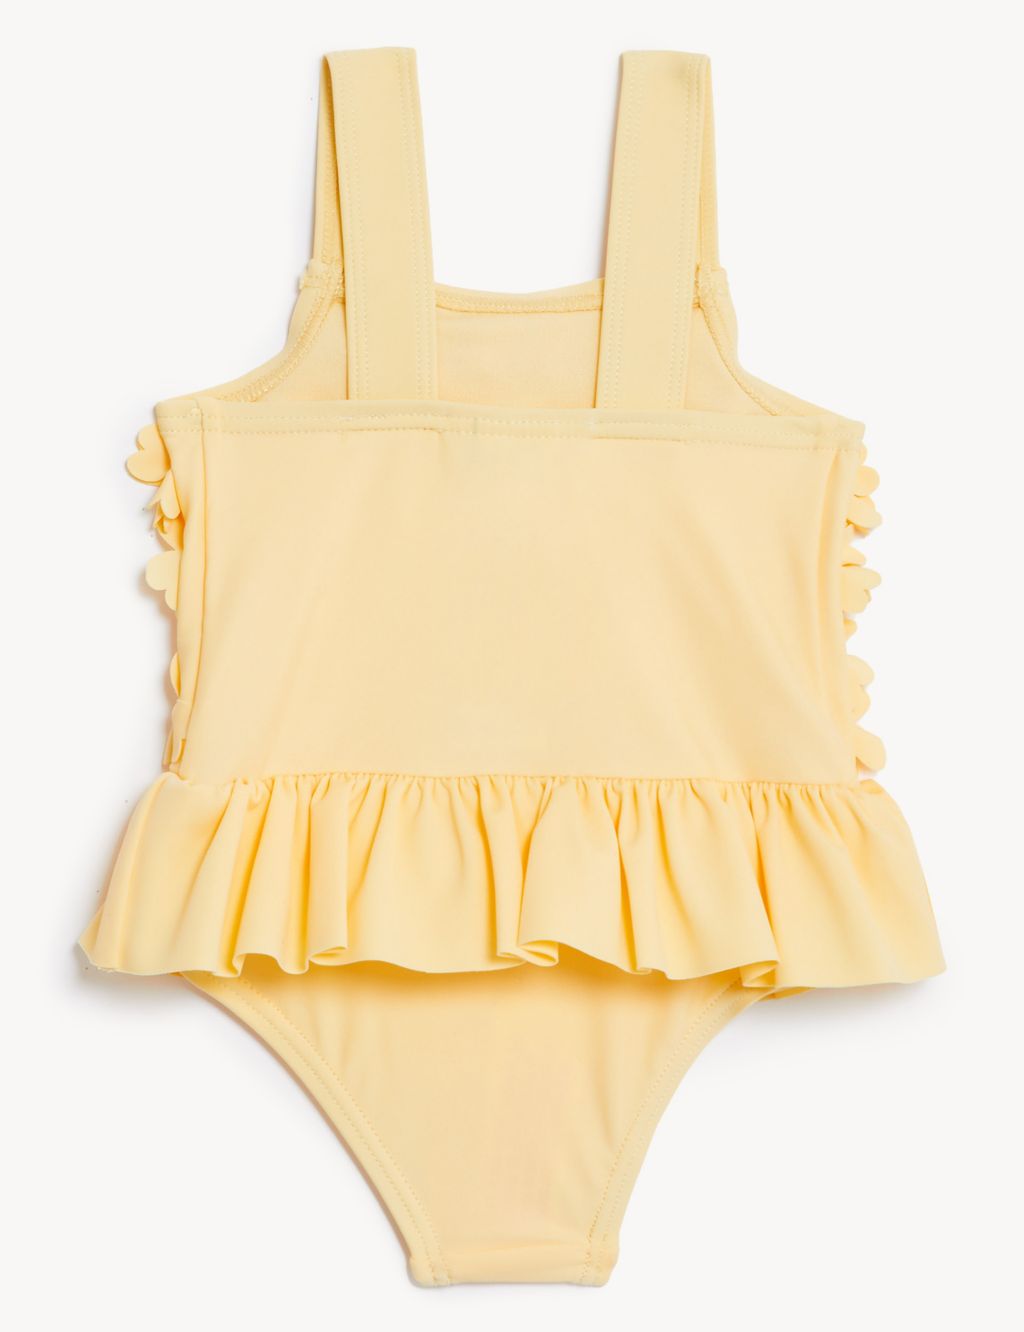 Floral Ruffle Swimsuit (0-3 Yrs) image 2